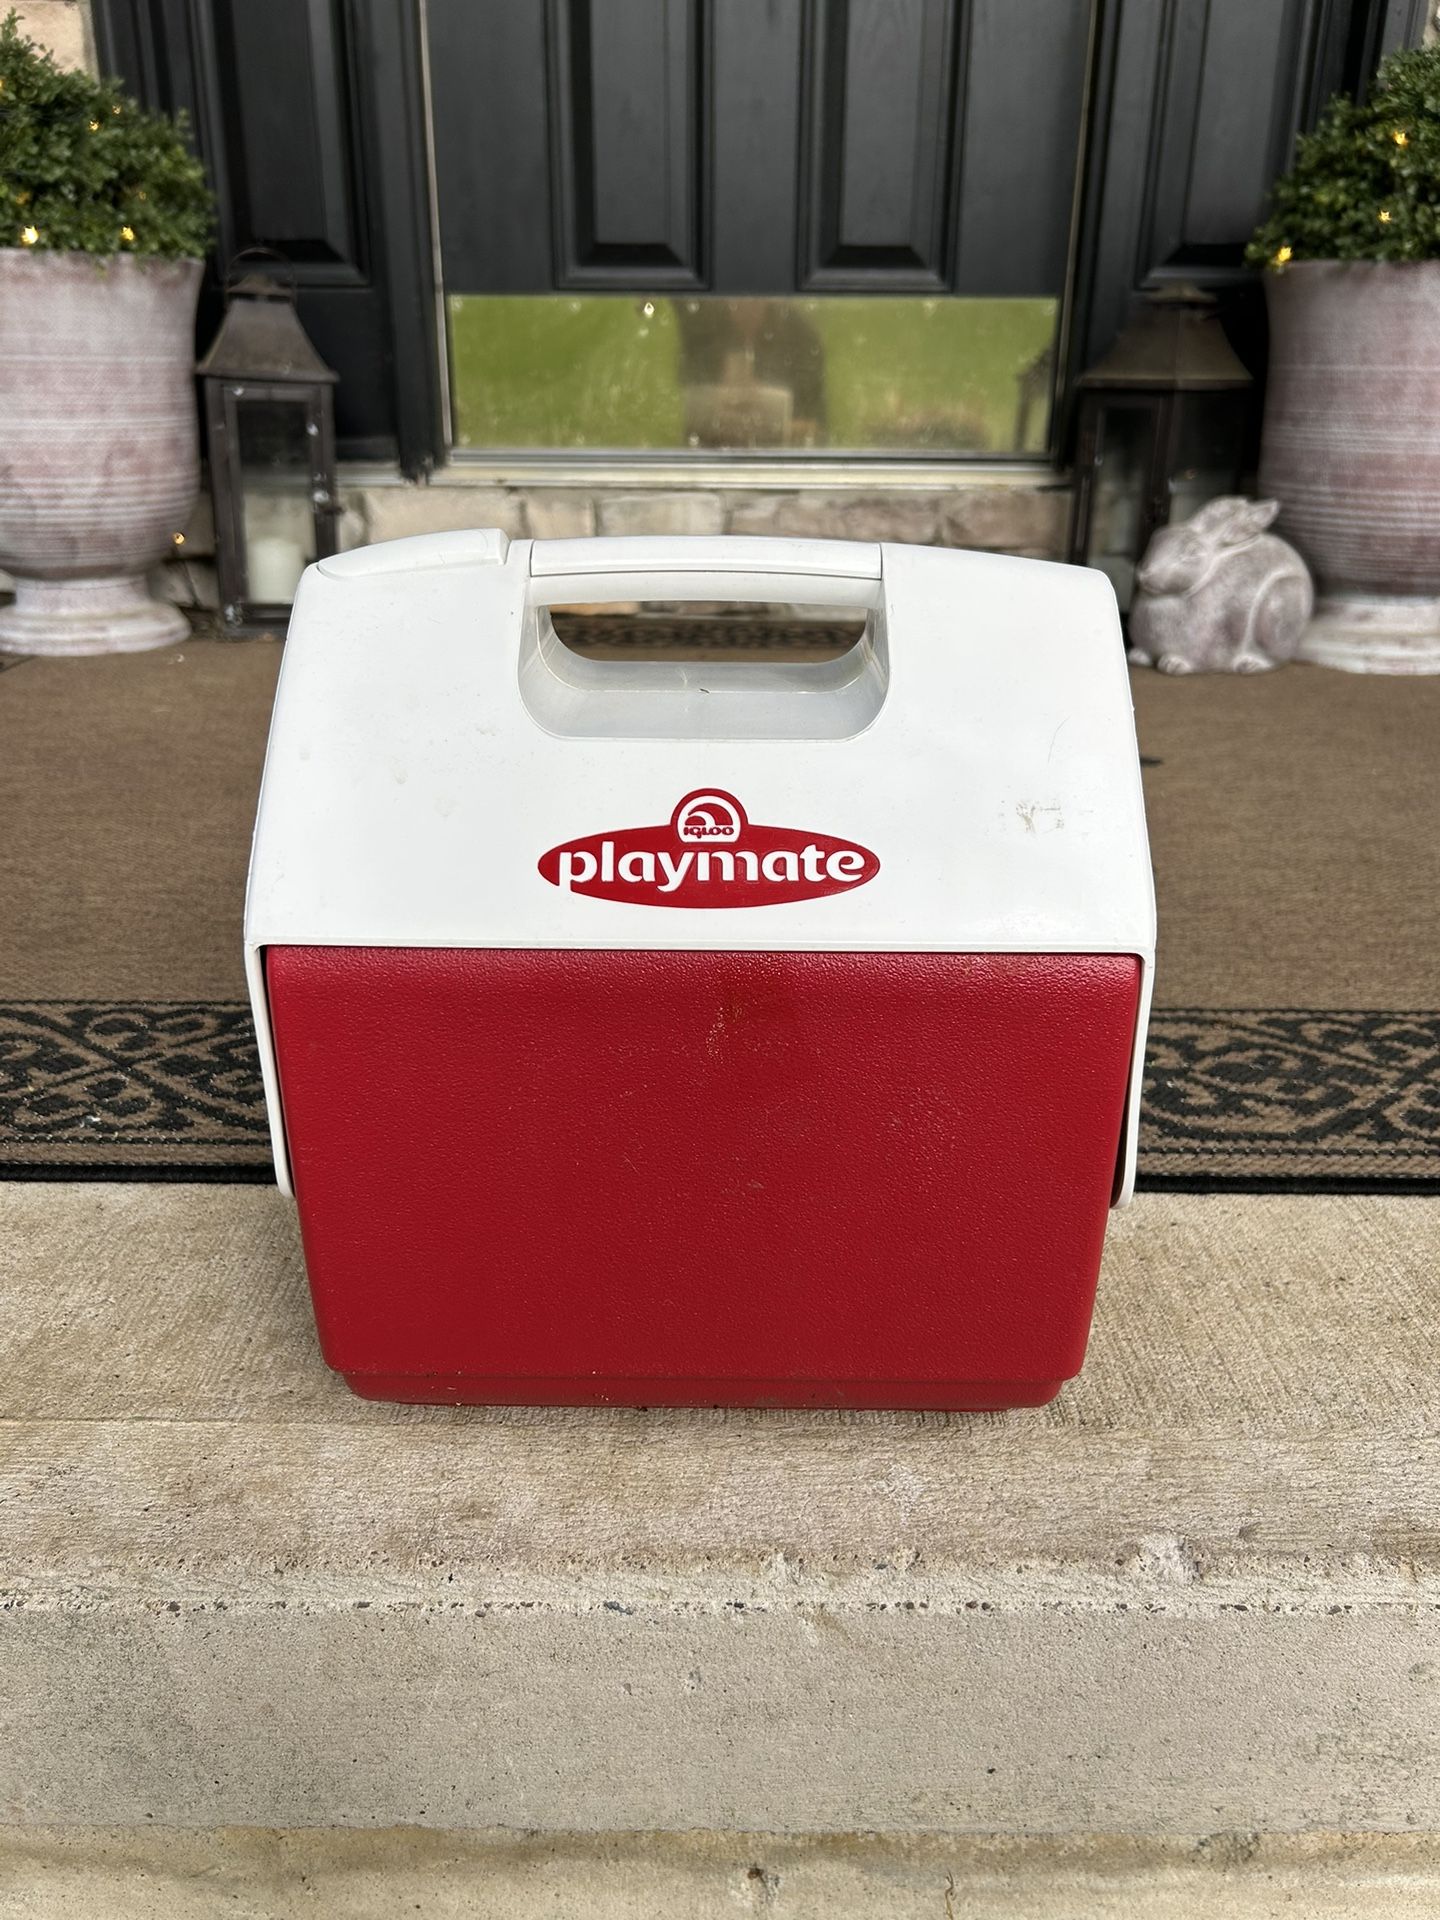 Igloo Playmate 6 Can Cooler Ice Chest Push Button Flip Top Red White Made In USA